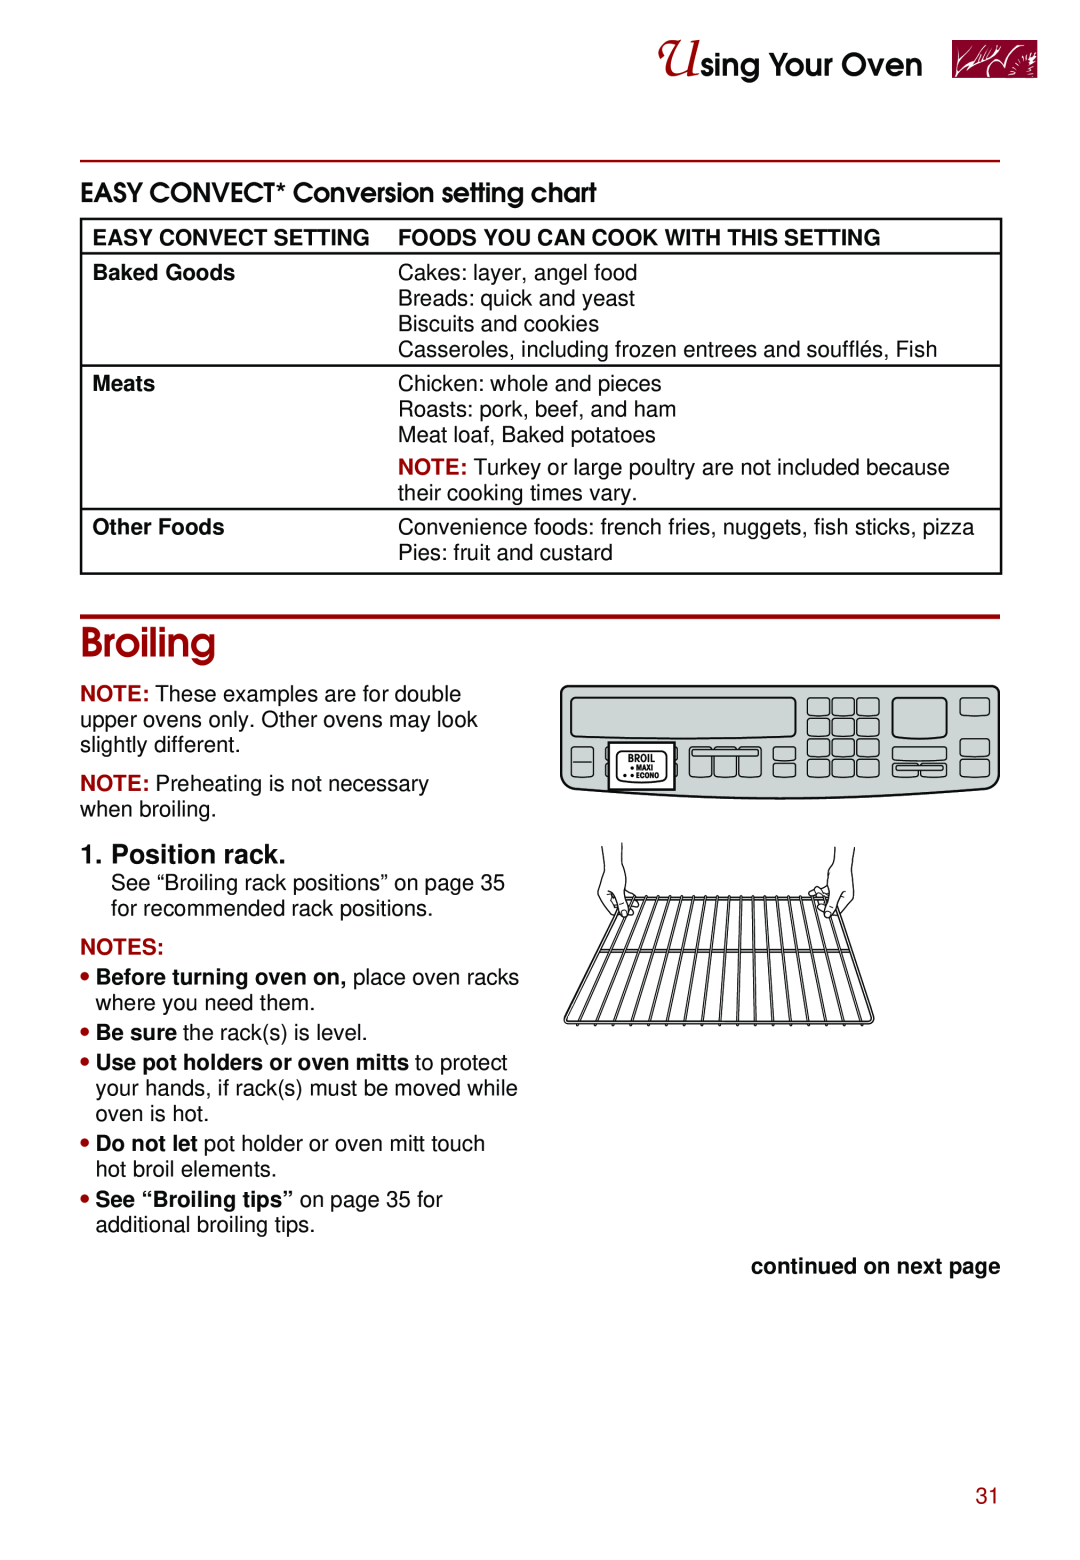 Whirlpool KEBS207D, KEBS247D, KEBS278D Broiling, EASY CONVECT* Conversion setting chart, Position rack, Using Your Oven 